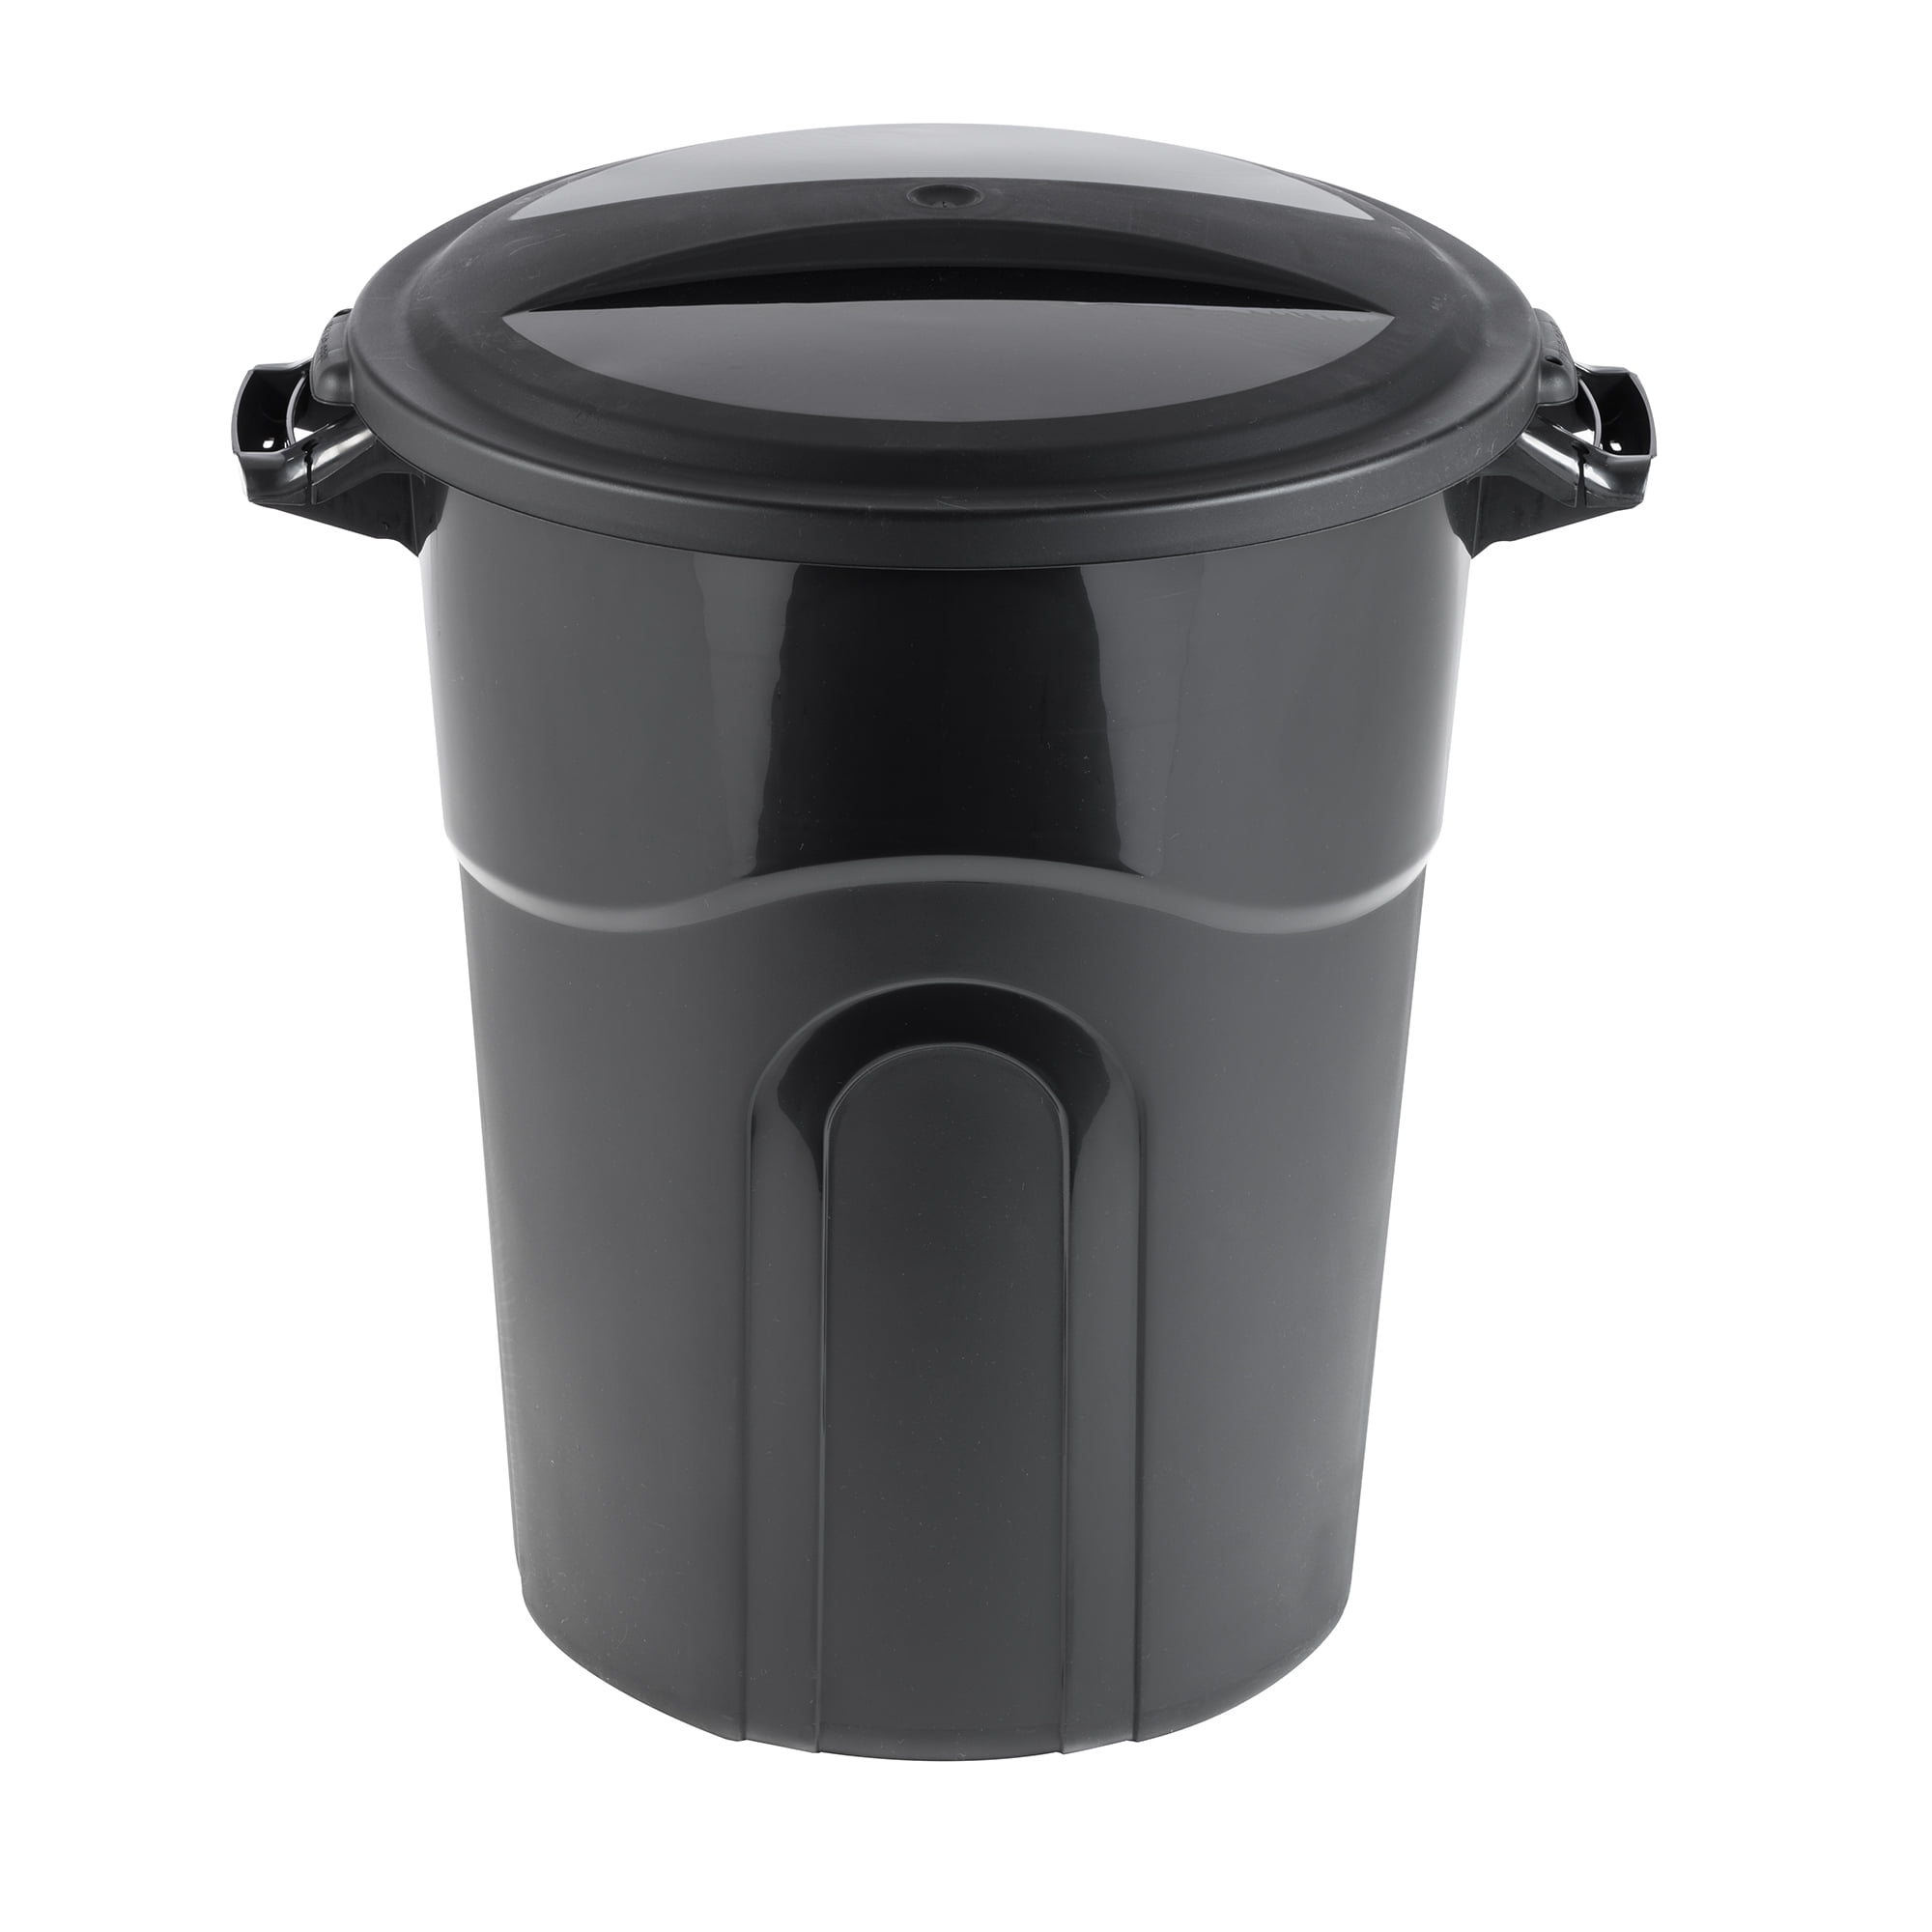 Yaomiao 2 Pack 20 Gallon Total Heavy Duty Wheeled Trash Can with Lid  Garbage Bins Outdoor Plastic Trash Bin with Wheels Attached Lid and Handles  for